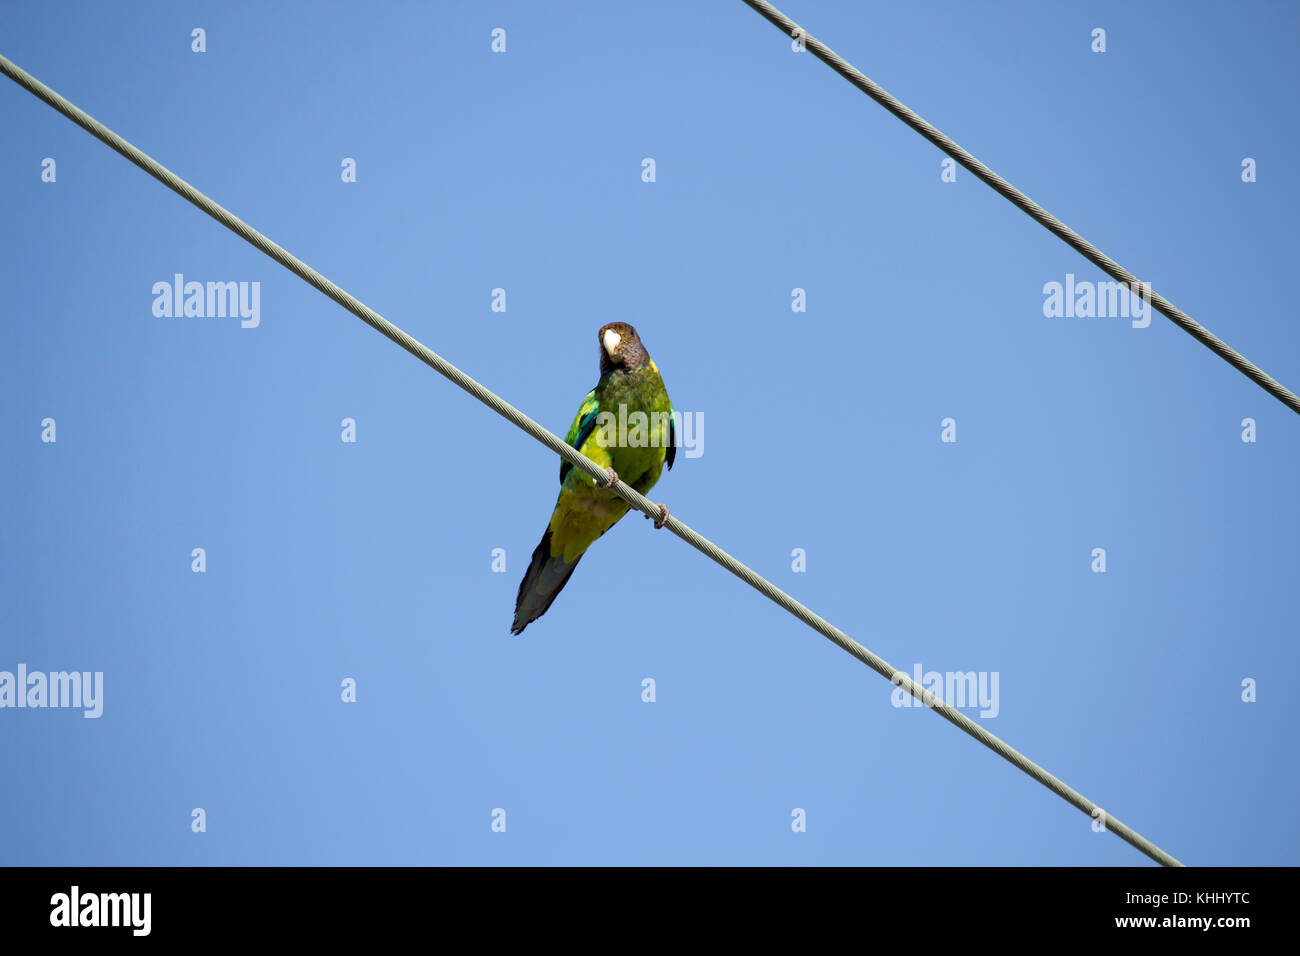 A brightly green feathered Australian Ringneck (Barnardius zonarius)  a parrot native to Australia perches on a suburban power line on a fine day Stock Photo